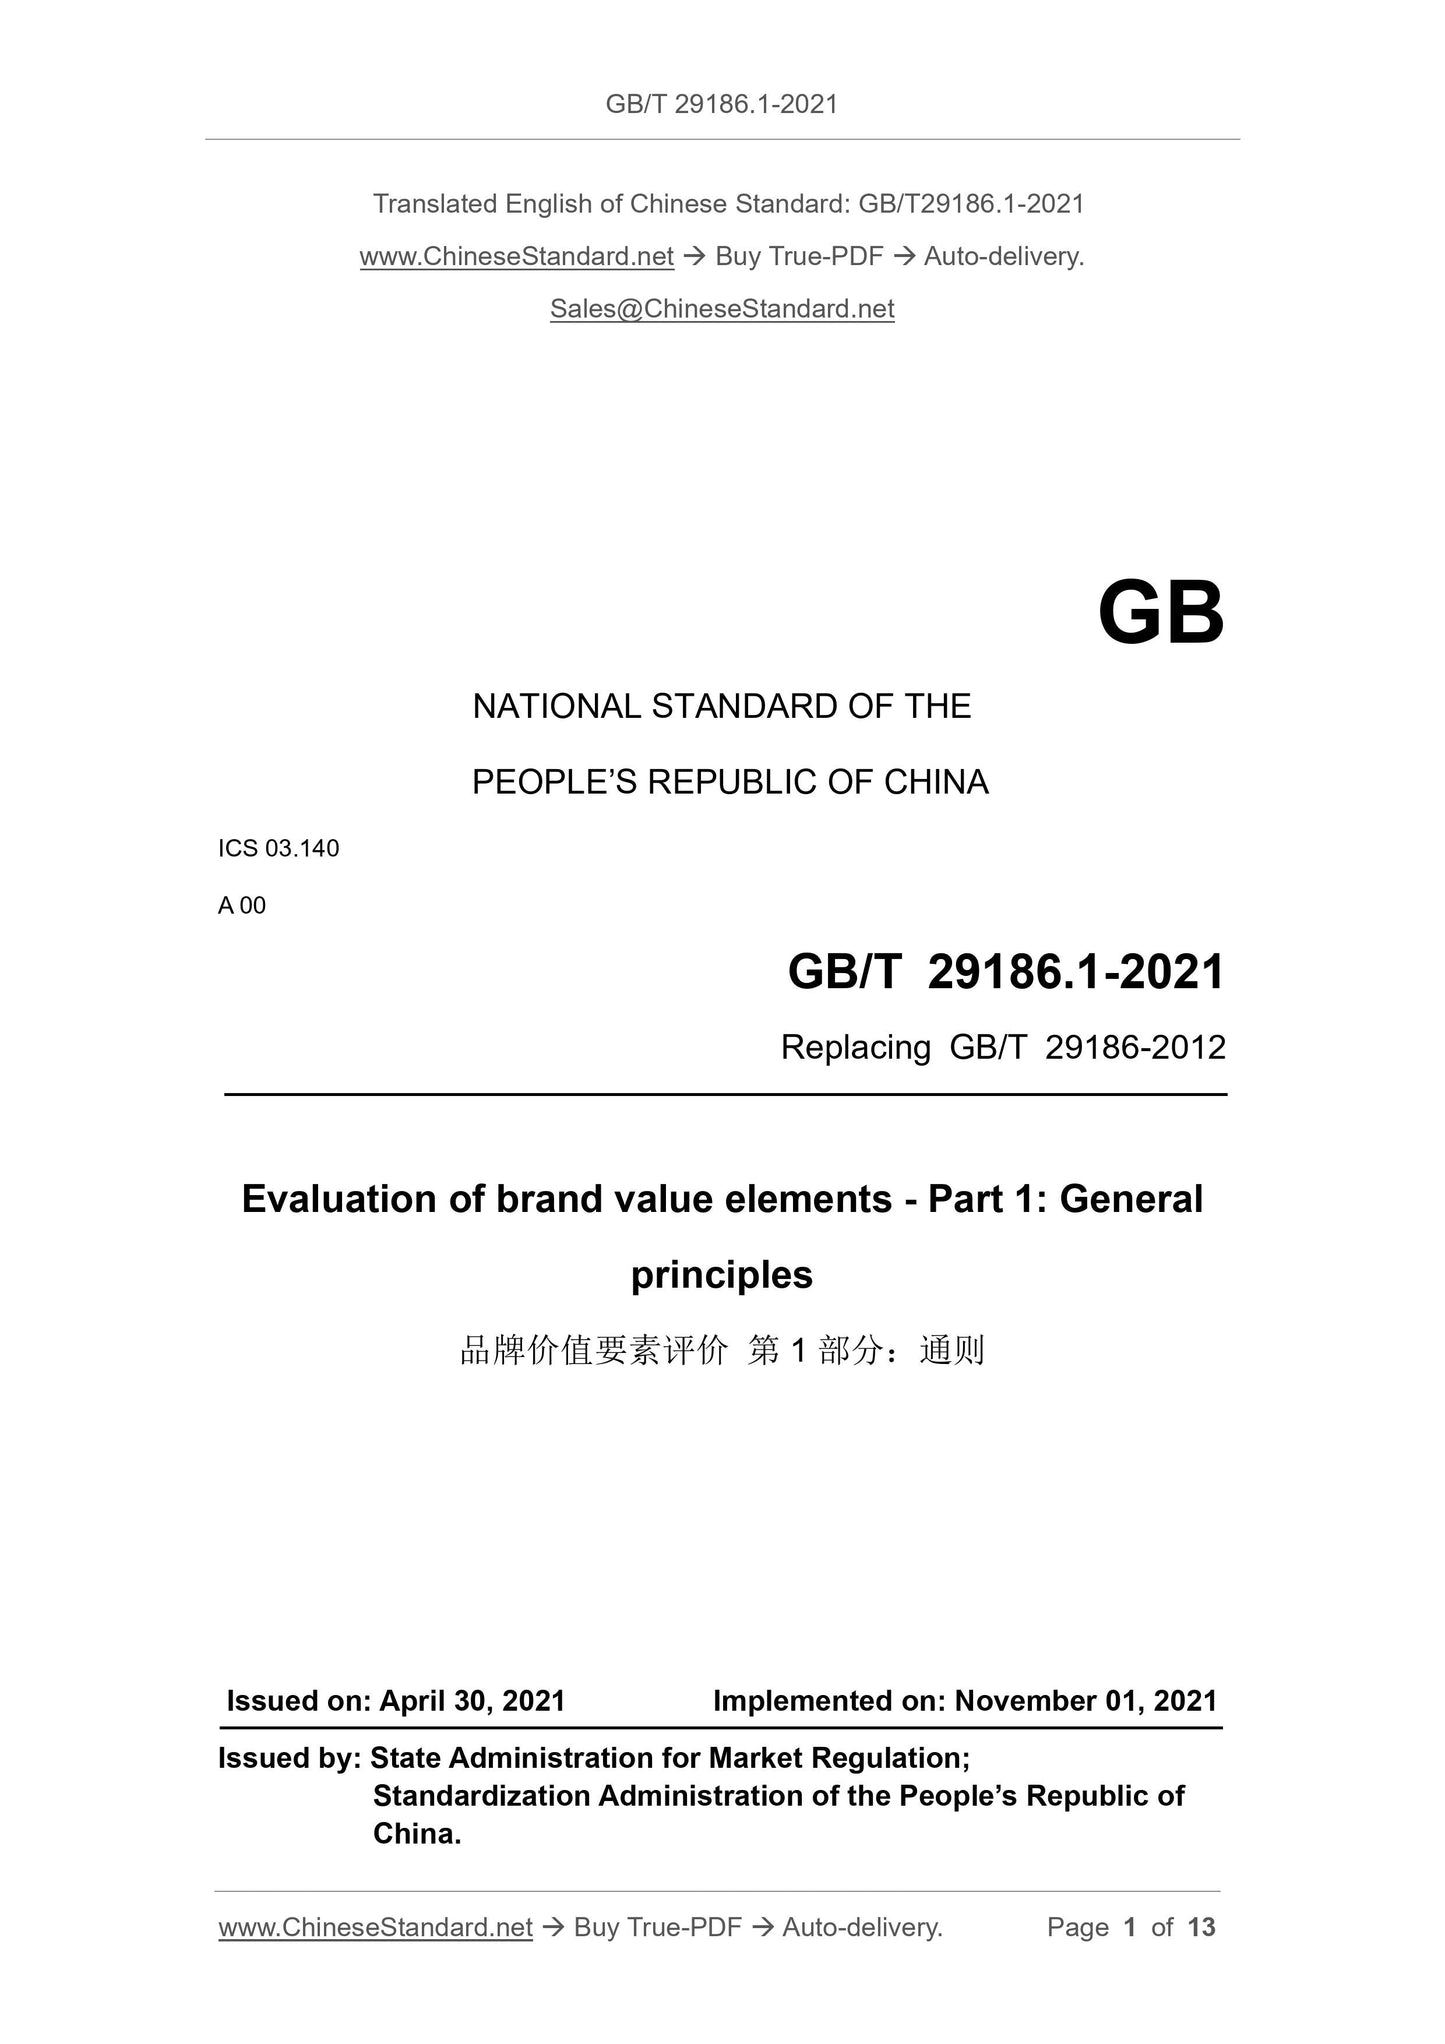 GB/T 29186.1-2021 Page 1